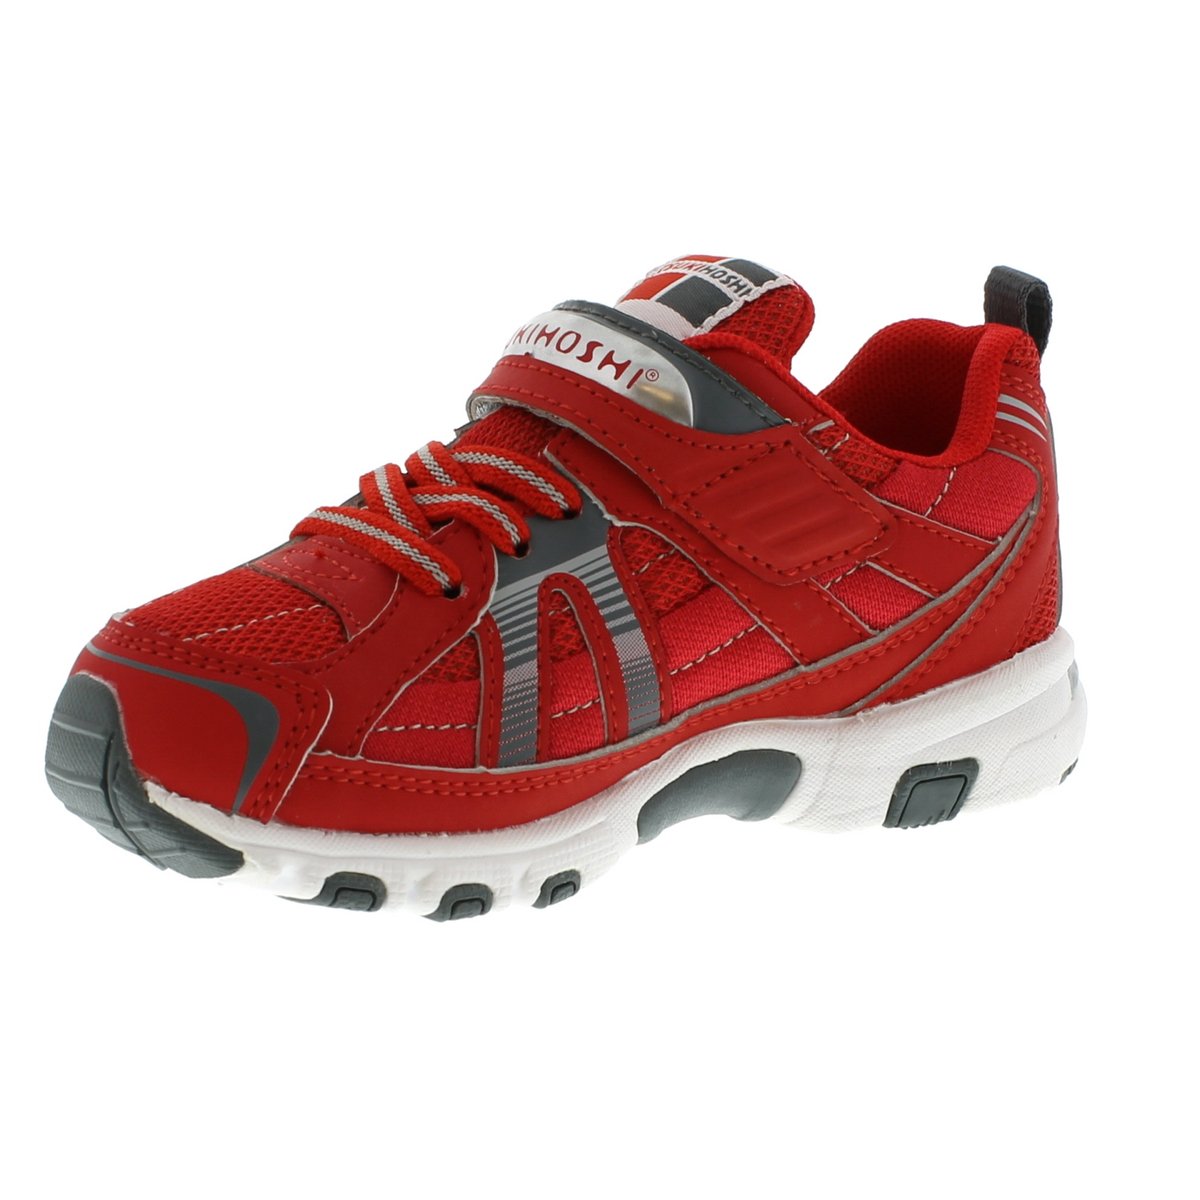 Child Tsukihoshi Storm Sneaker in Red/Gray from the front view